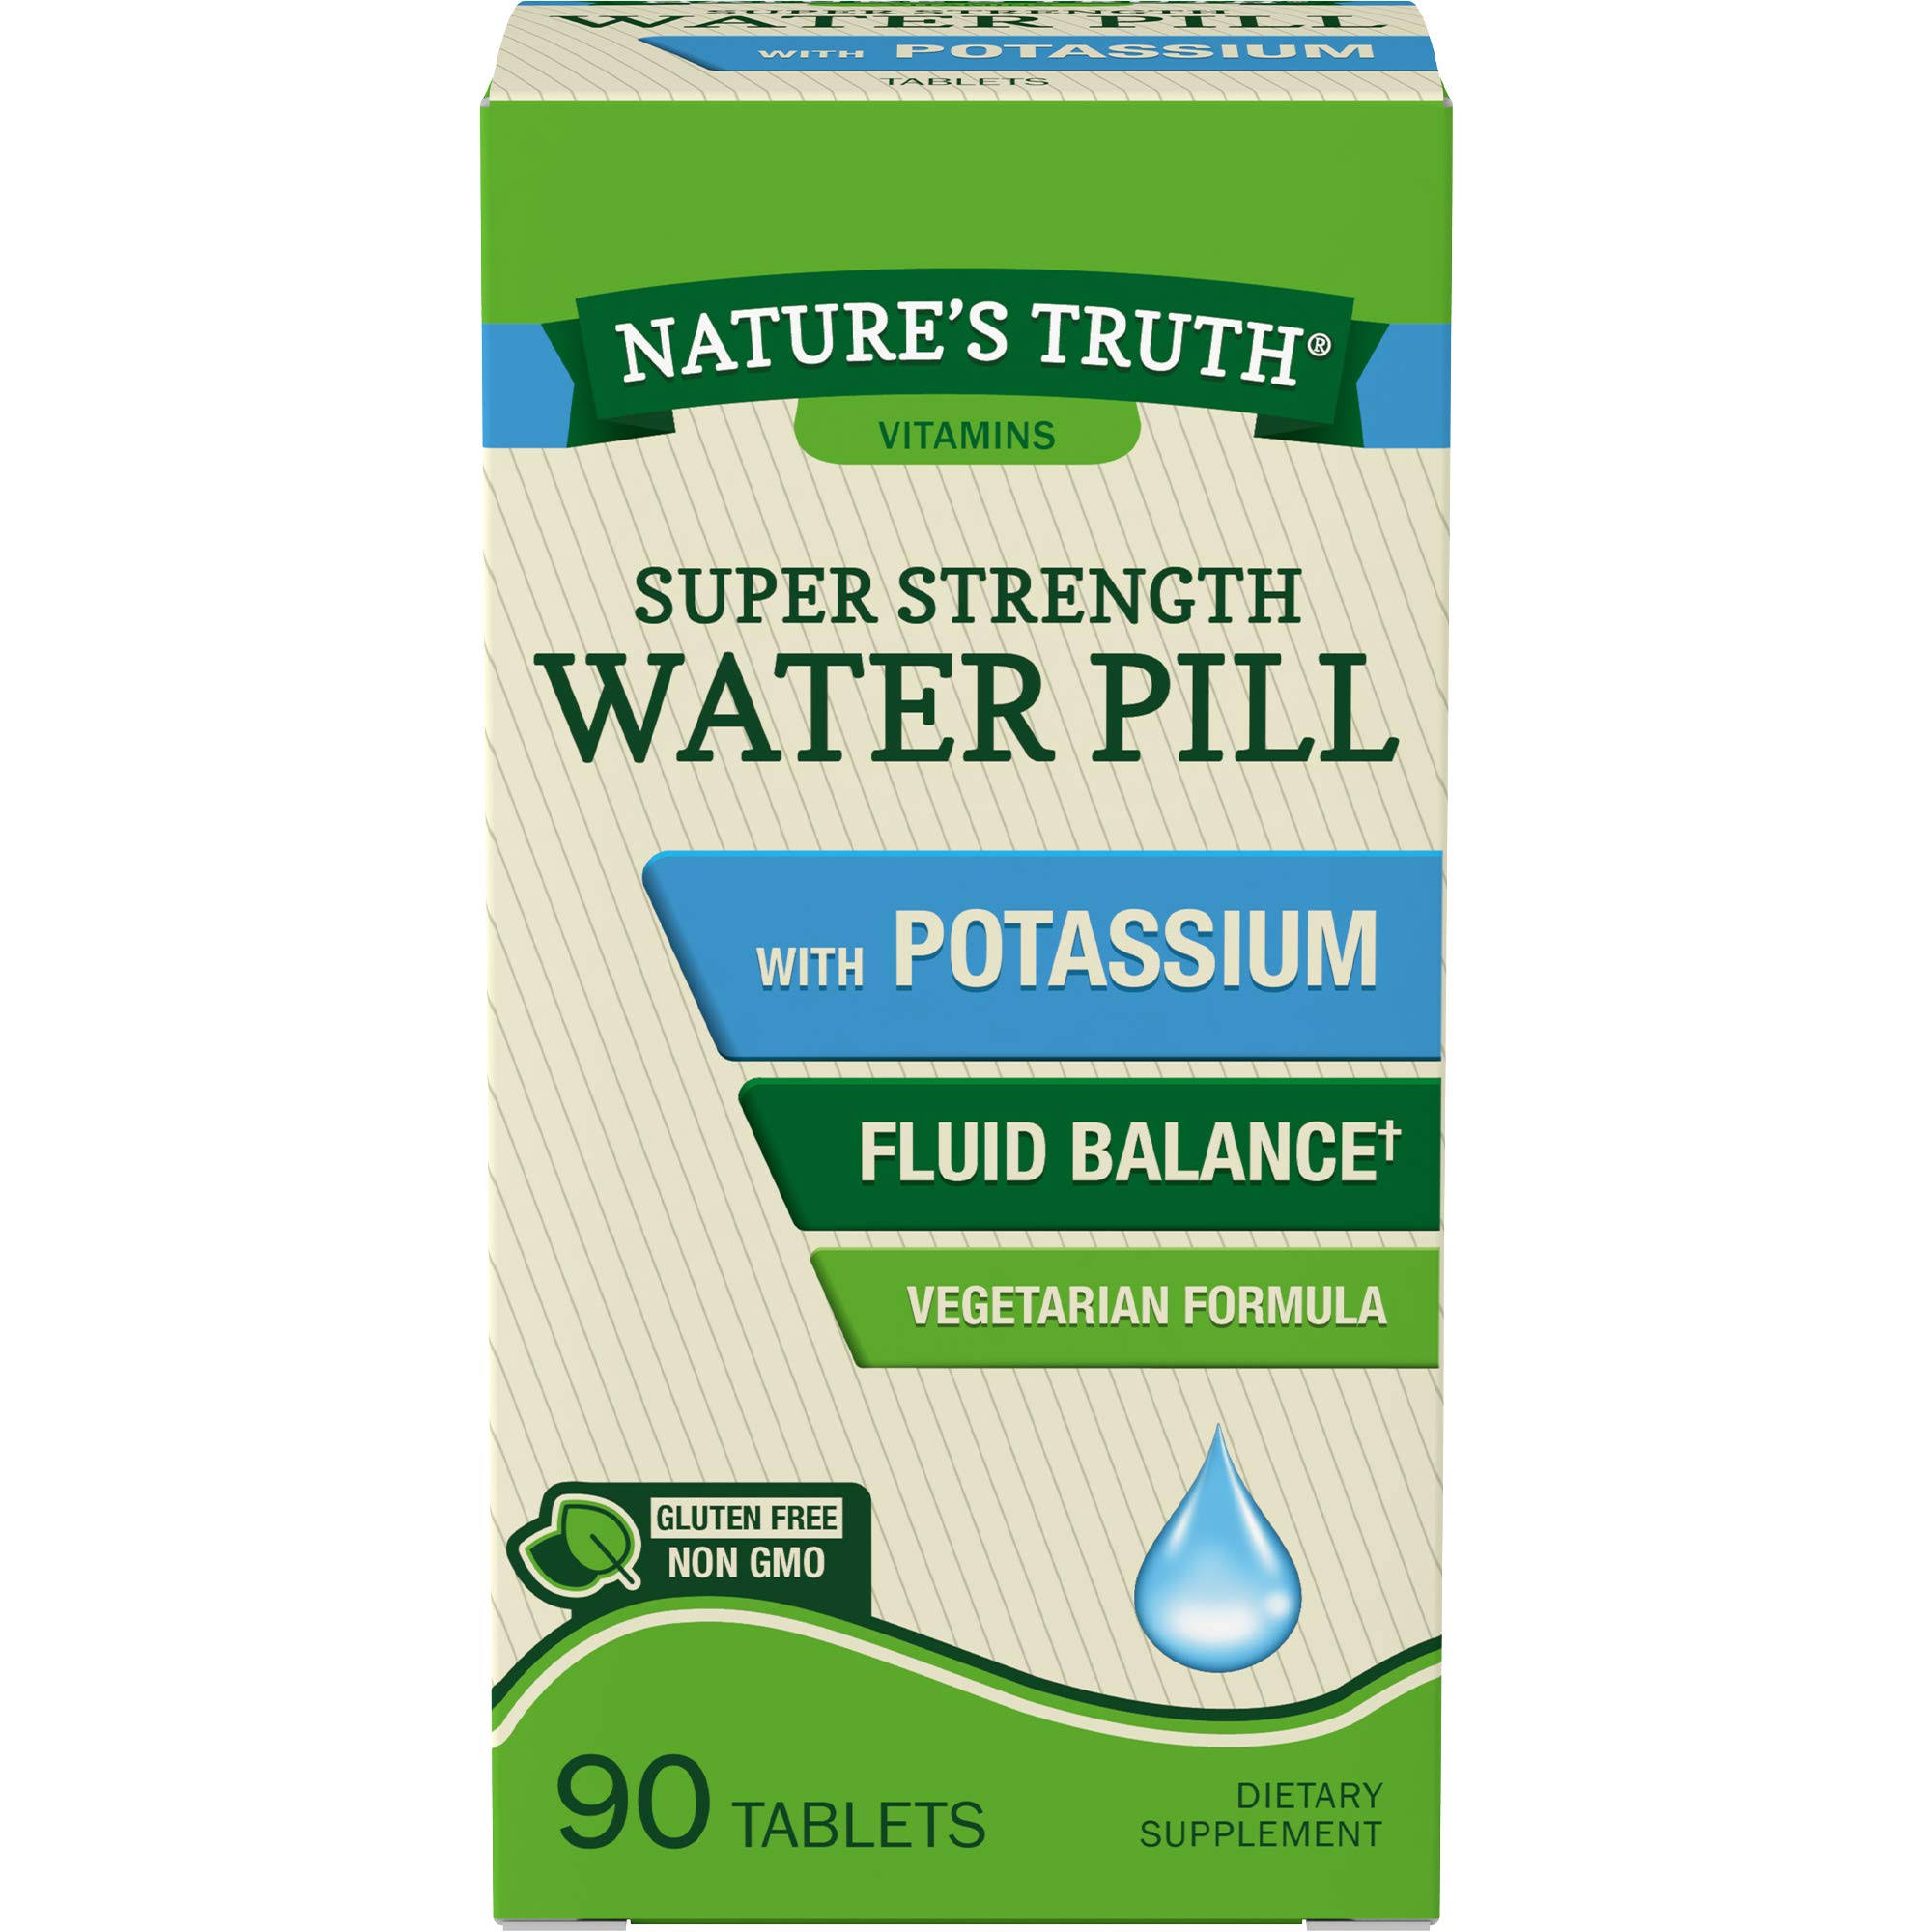 Nature's Truth Super Strength Water Pill - With Potassium, 90 Coated Caplets